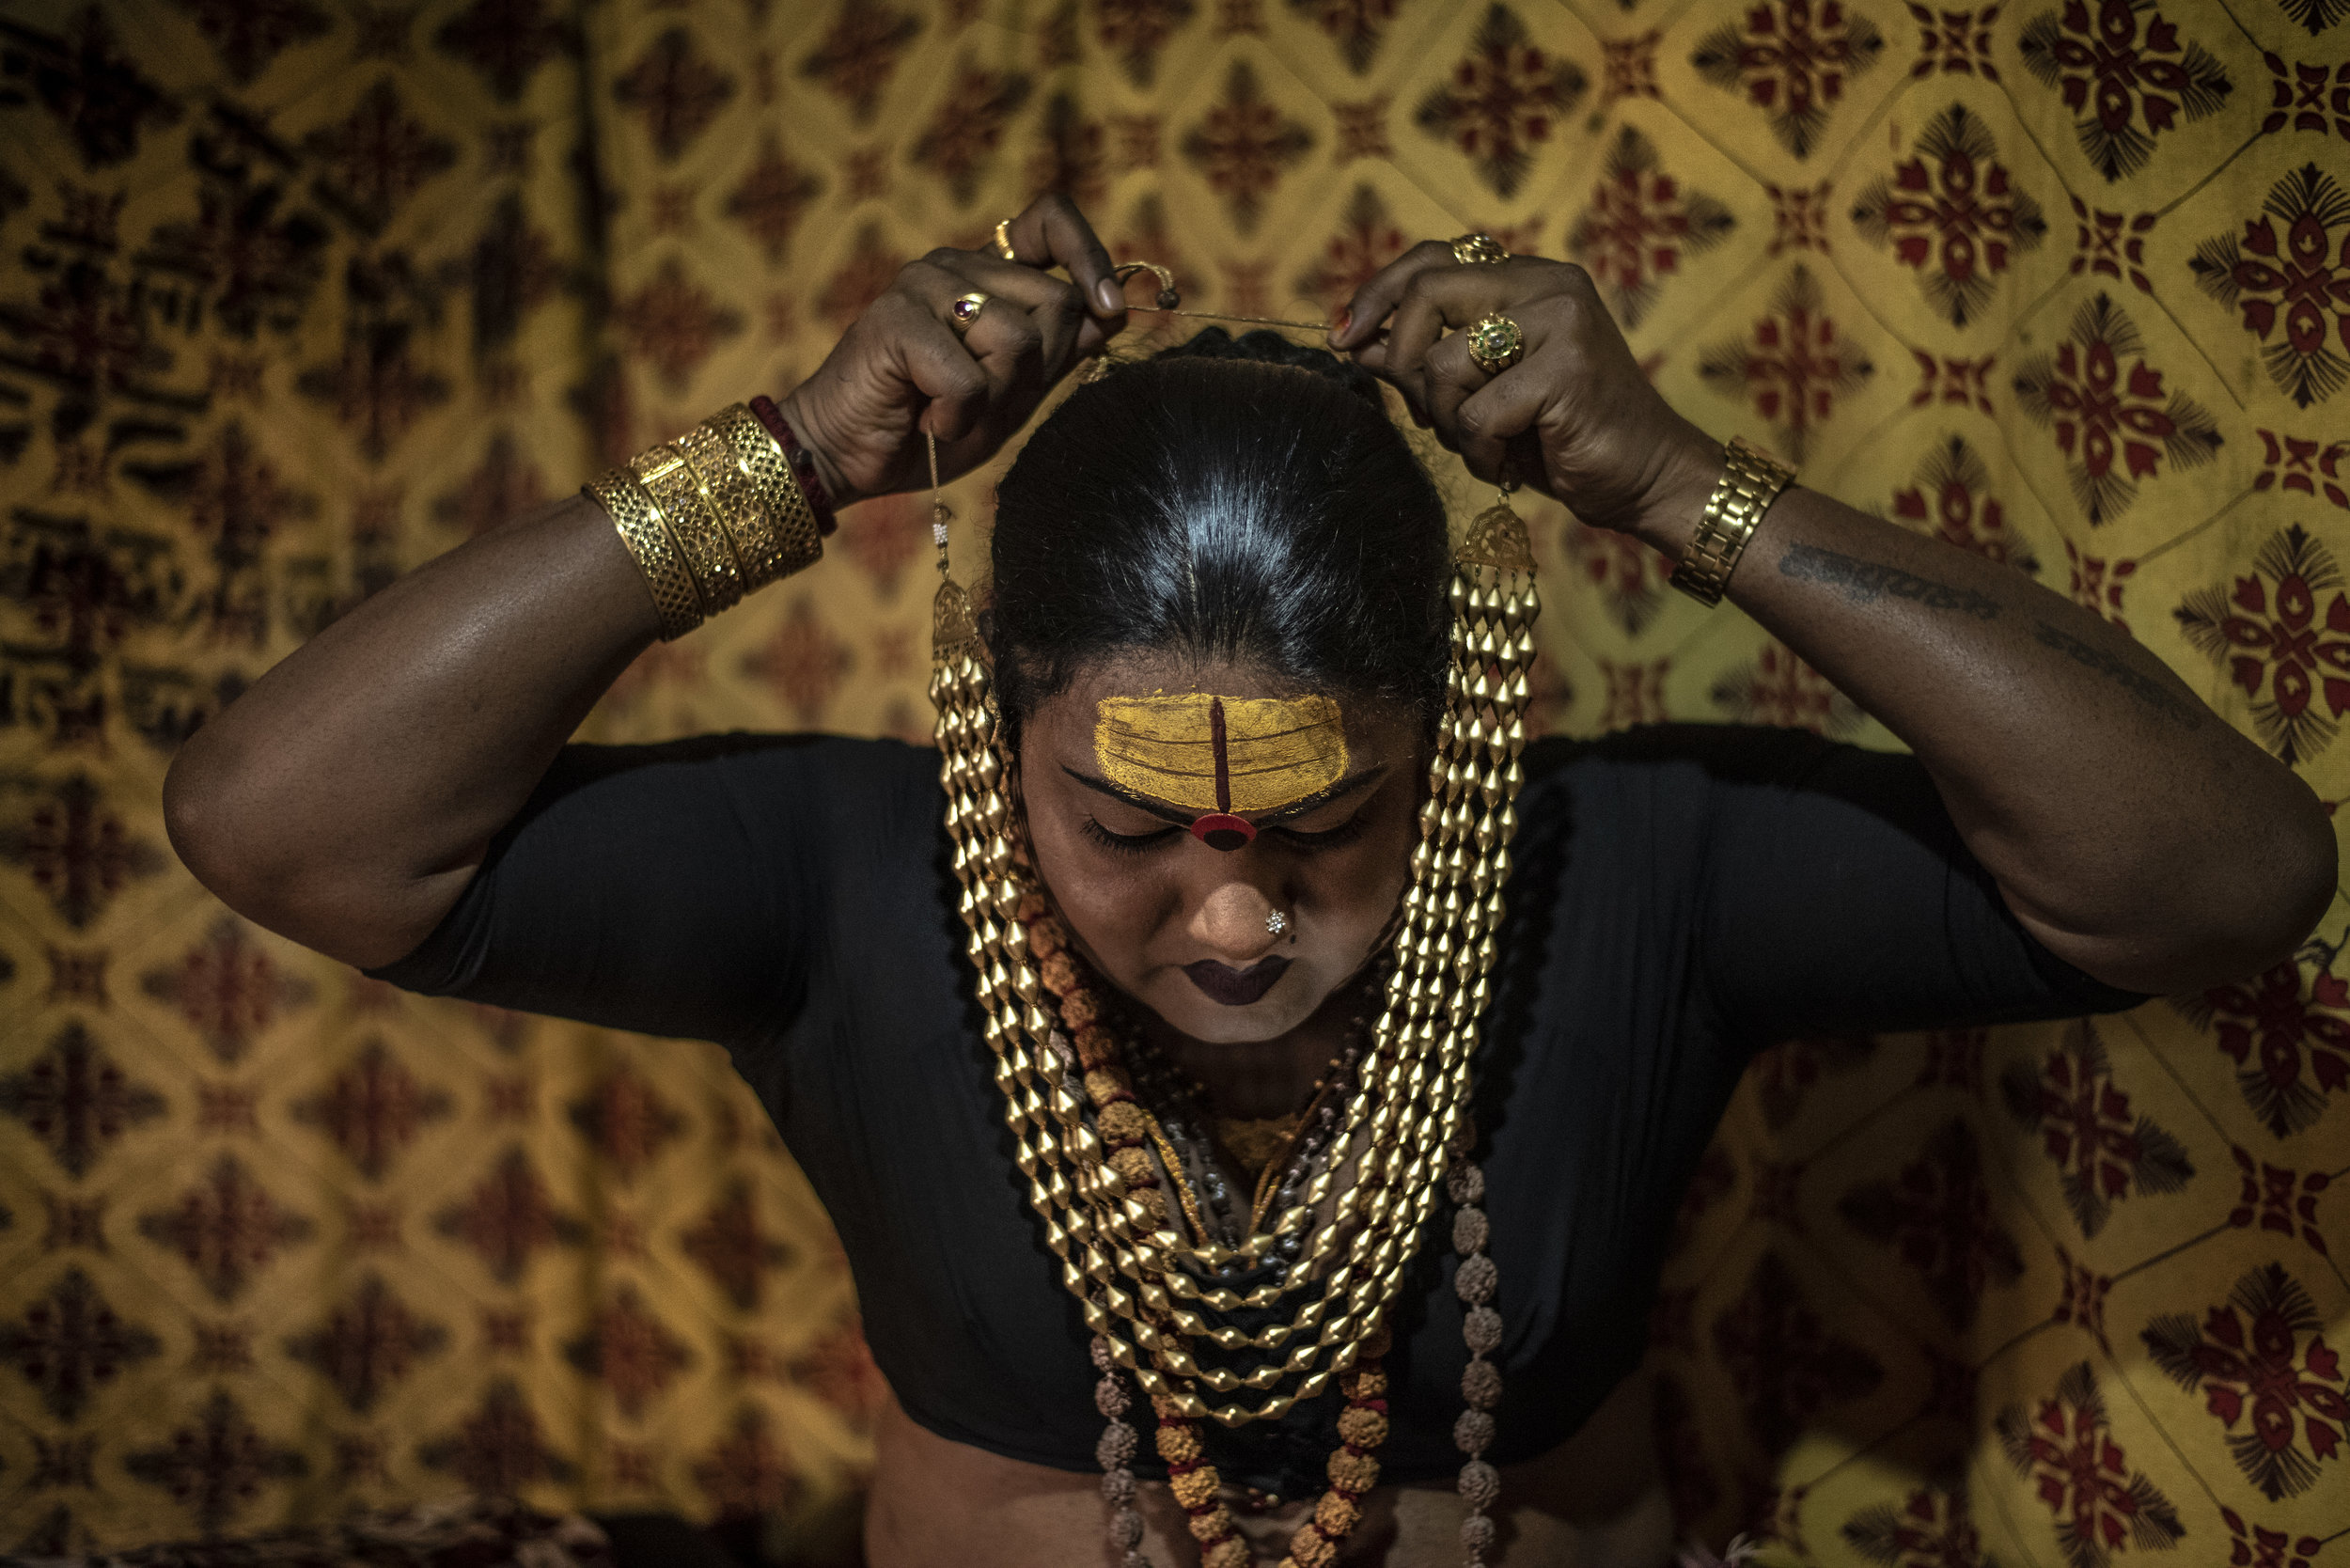  Mayuri Ma belongs to a sect of transgender Sadhus known within Hinduism as the Kinnar Akada. Like many transgenders in India, she faced the persistent and malicious discrimination that often led others to begging and prostitution. Her strength and a